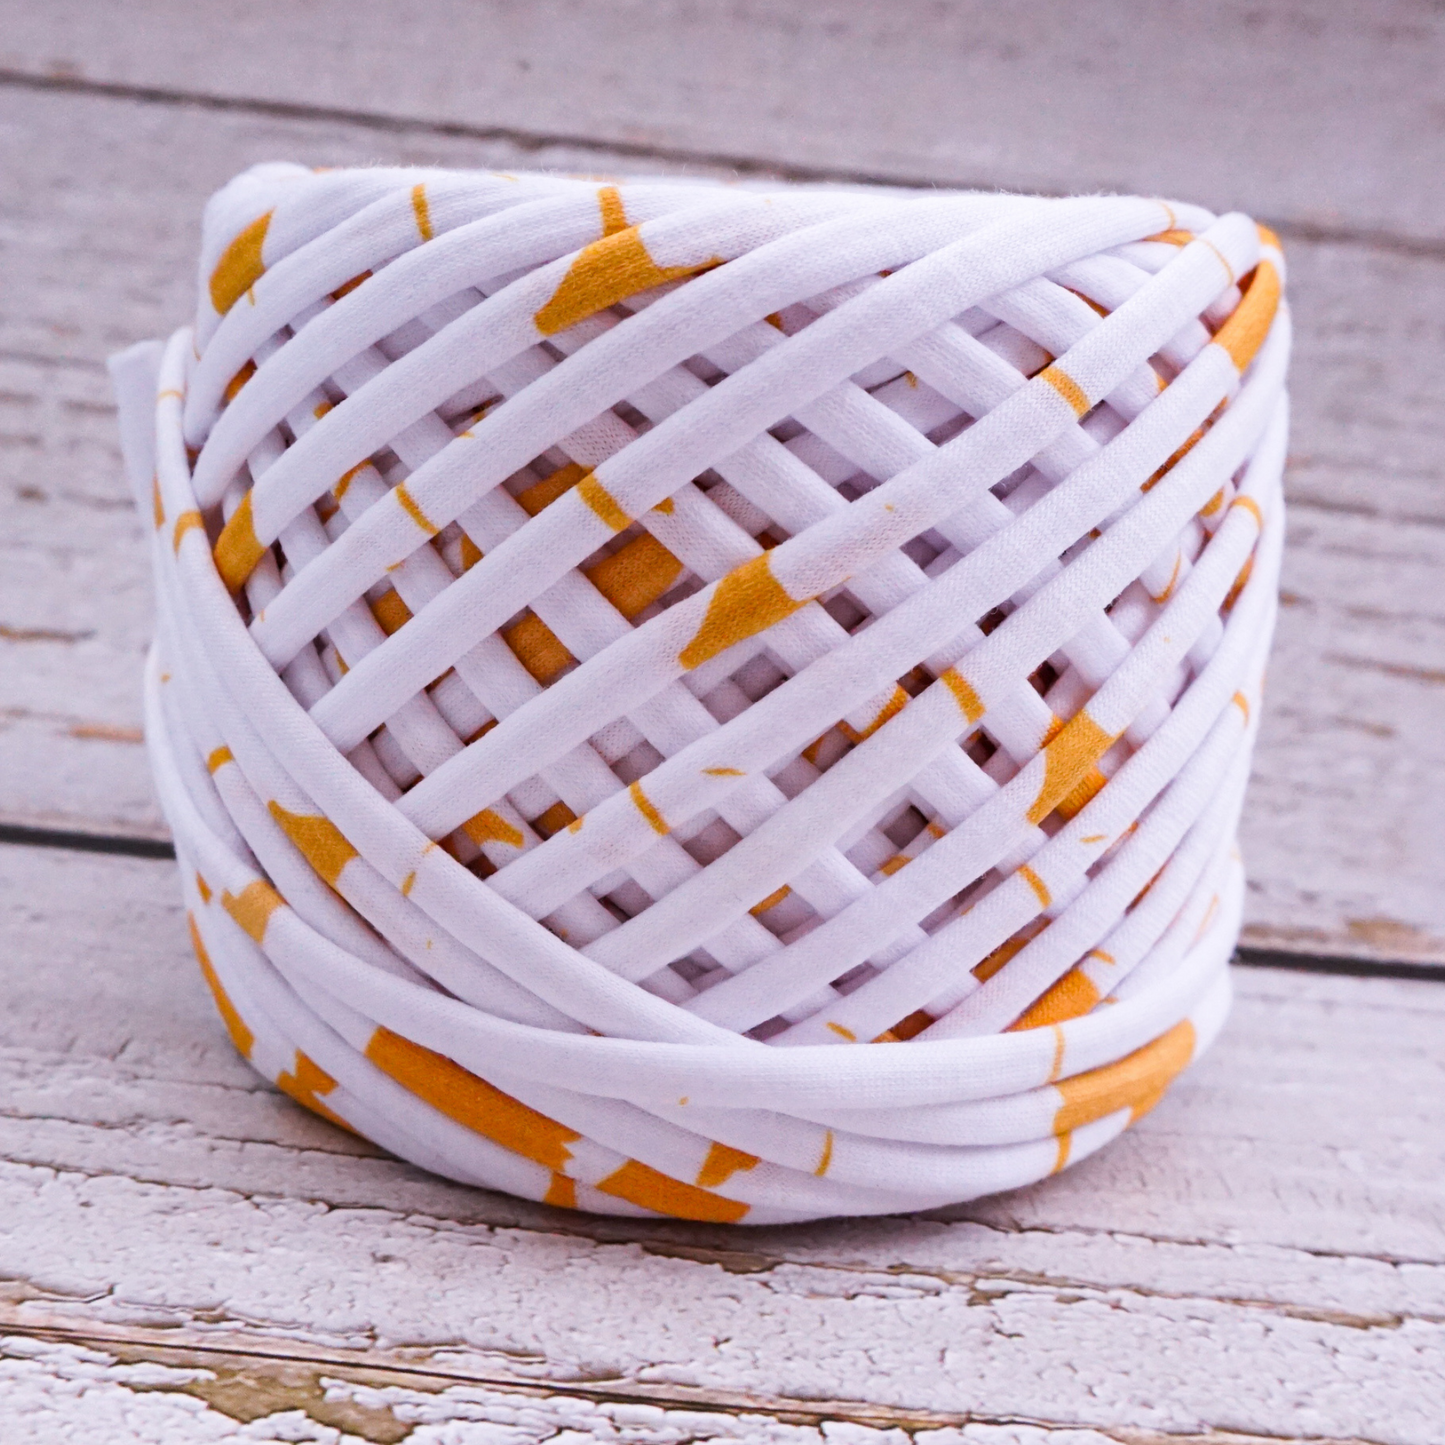 T-shirt yarn for crocheting baskets, bags, rugs and home decor. White with gold strokes